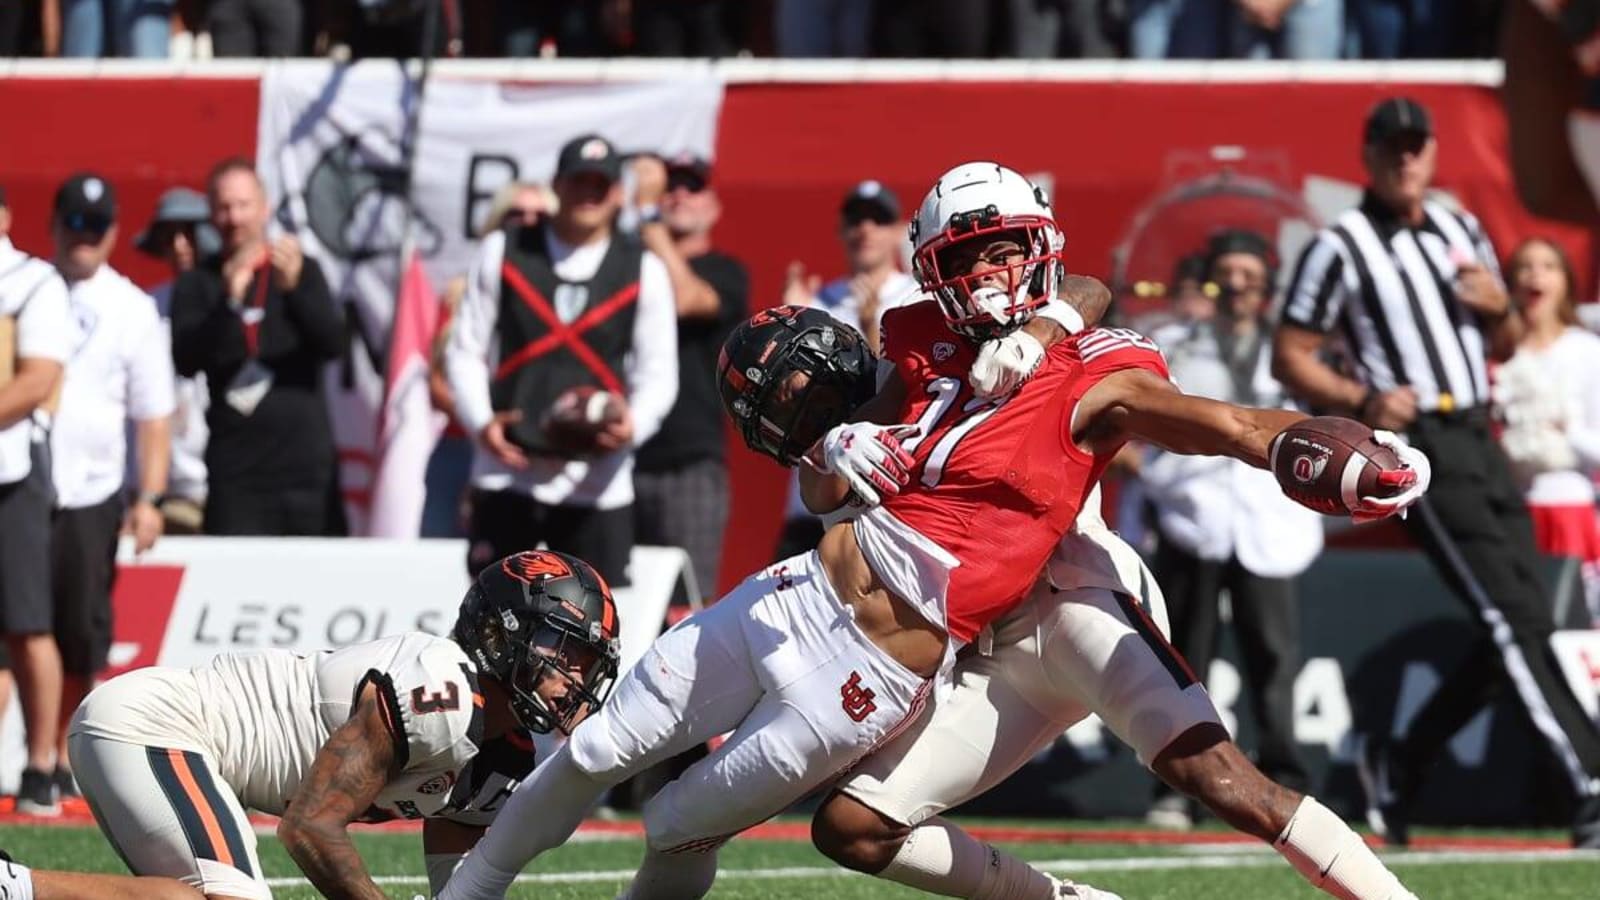 Devaughn Vele is living up to the hype for the Utah Utes